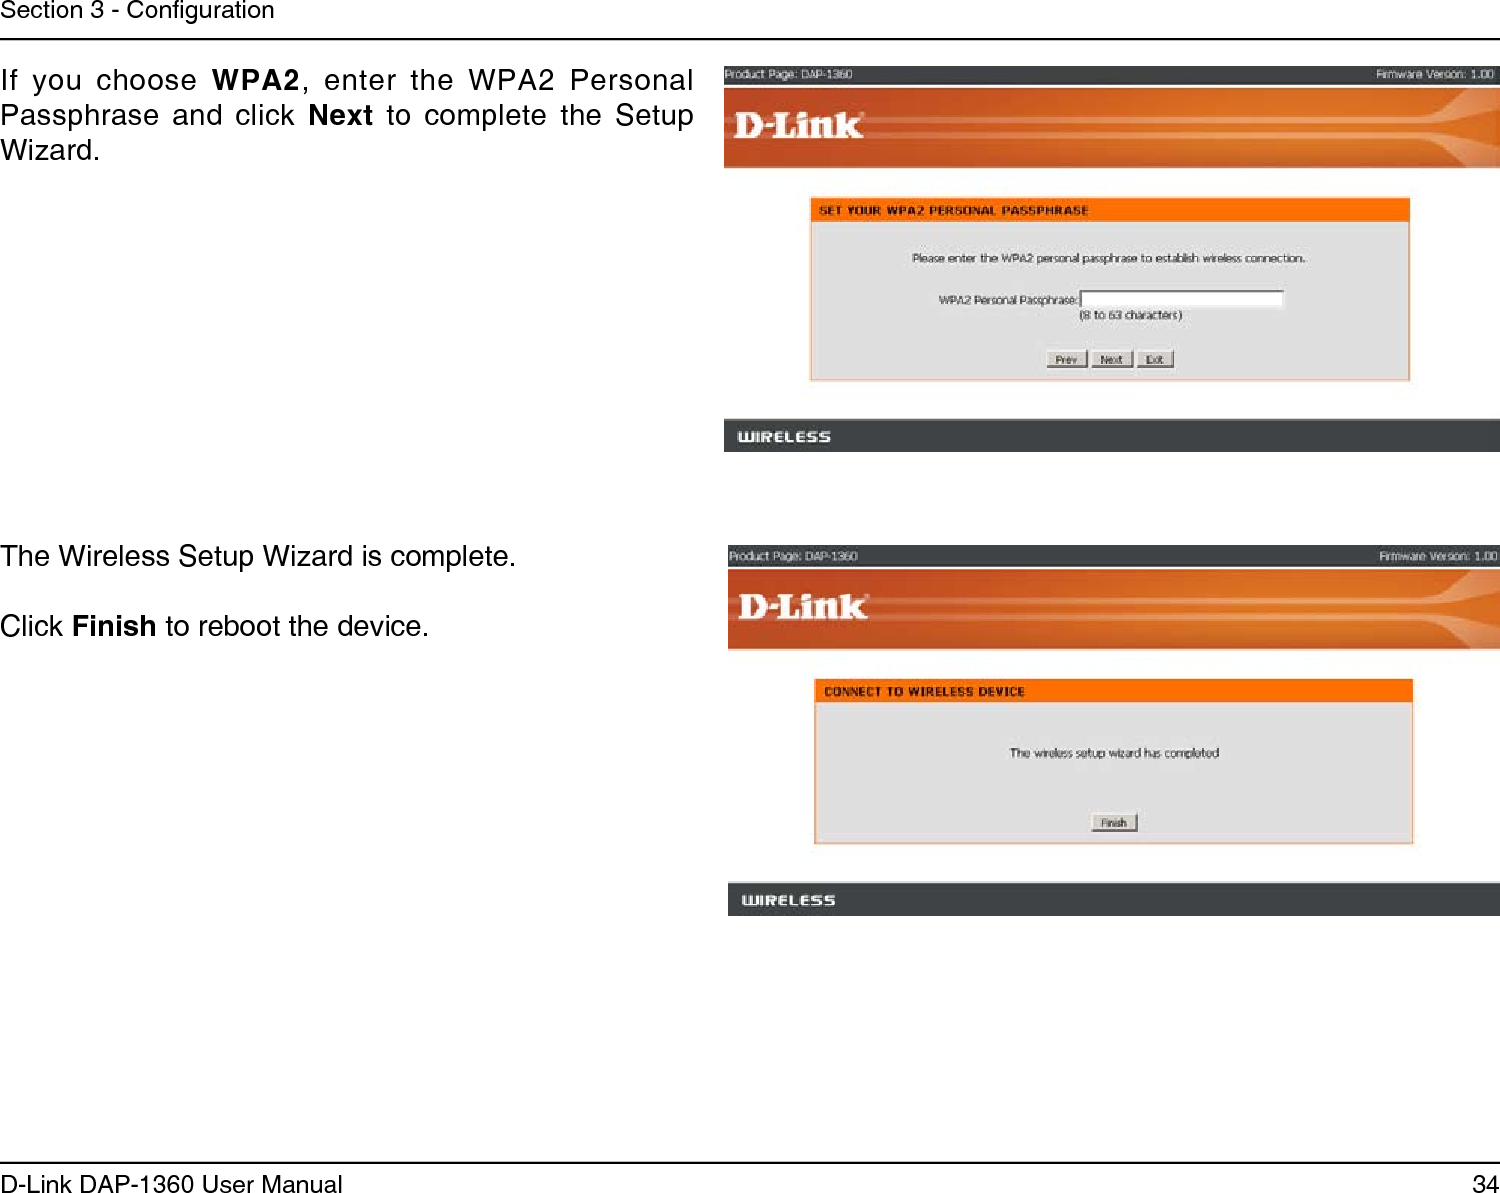 34D-Link DAP-1360 User ManualSection 3 - CongurationThe Wireless Setup Wizard is complete.Click Finish to reboot the device.If  you  choose  WPA2,  enter  the  WPA2  Personal Passphrase  and  click  Next  to  complete  the  Setup Wizard.